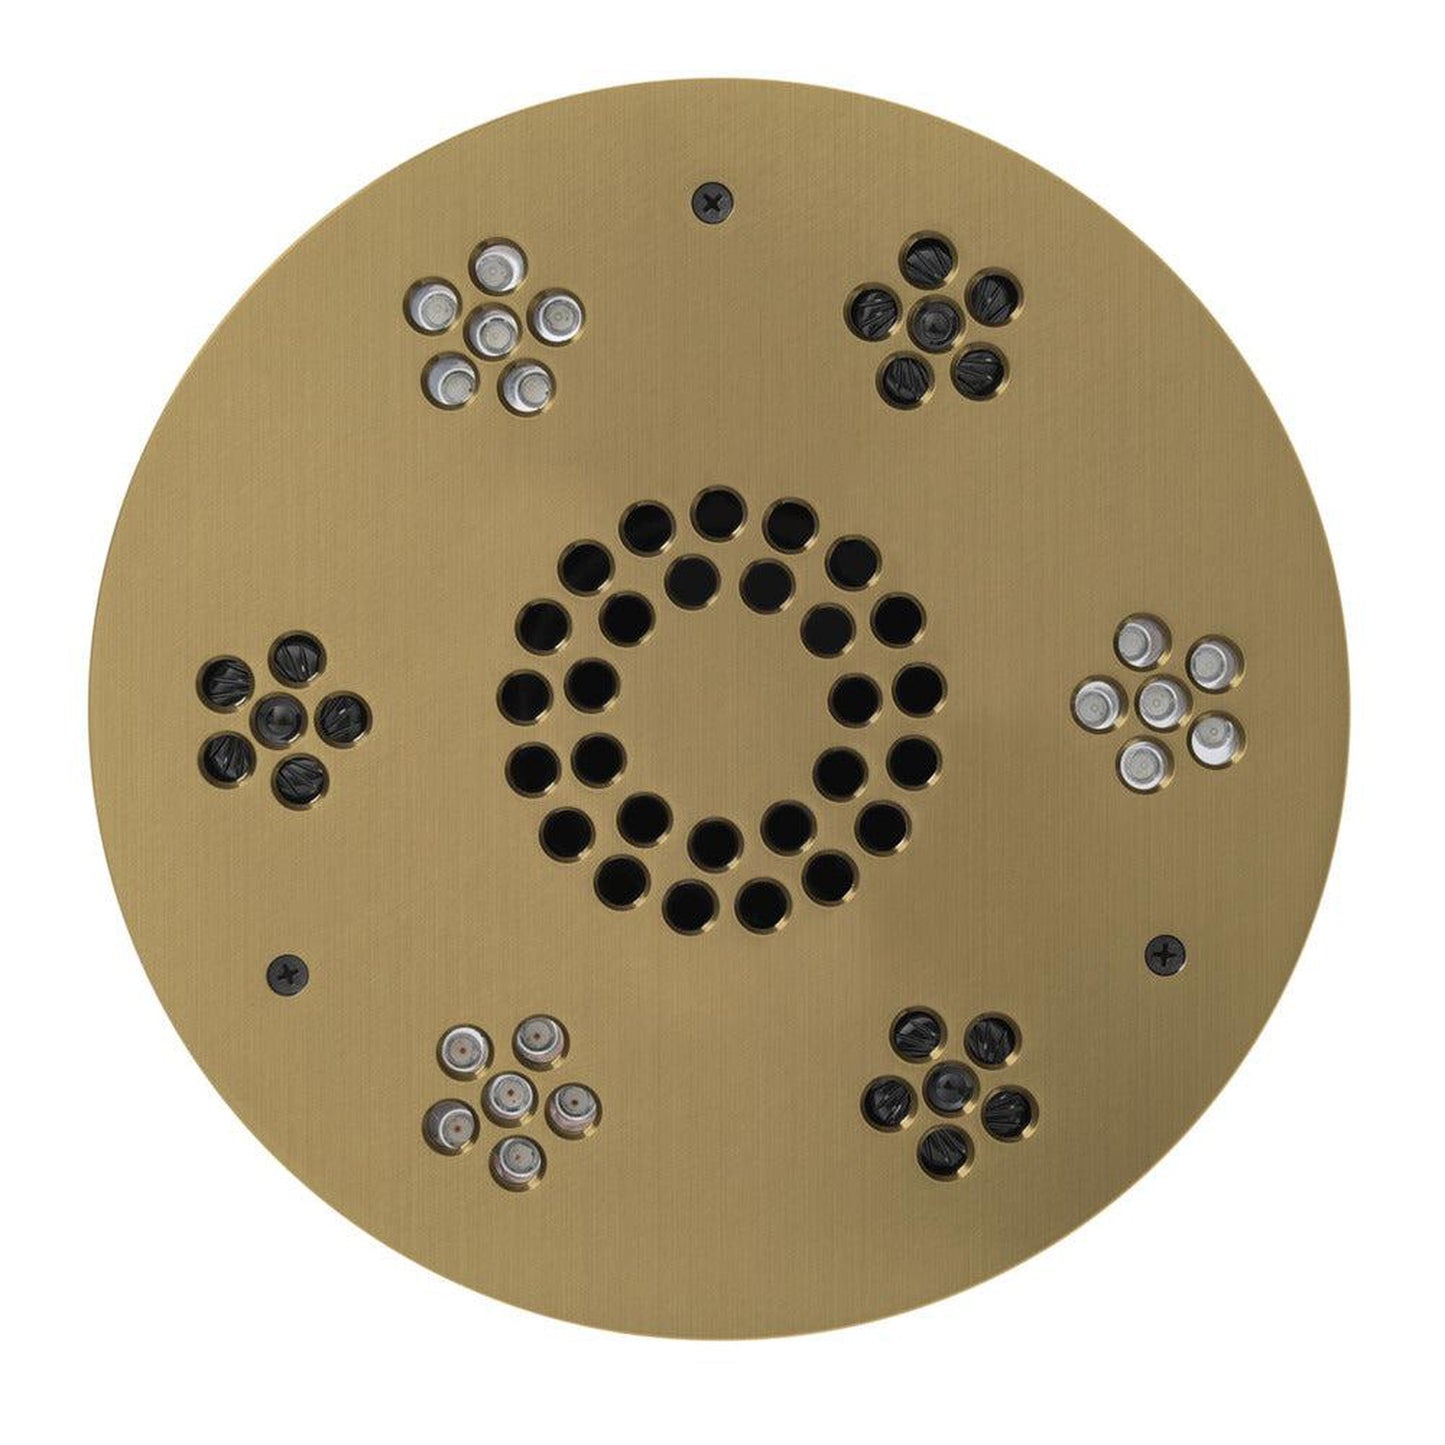 ThermaSol 10" Satin Brass Finish Round Serenity Essential Light and Music System Modern